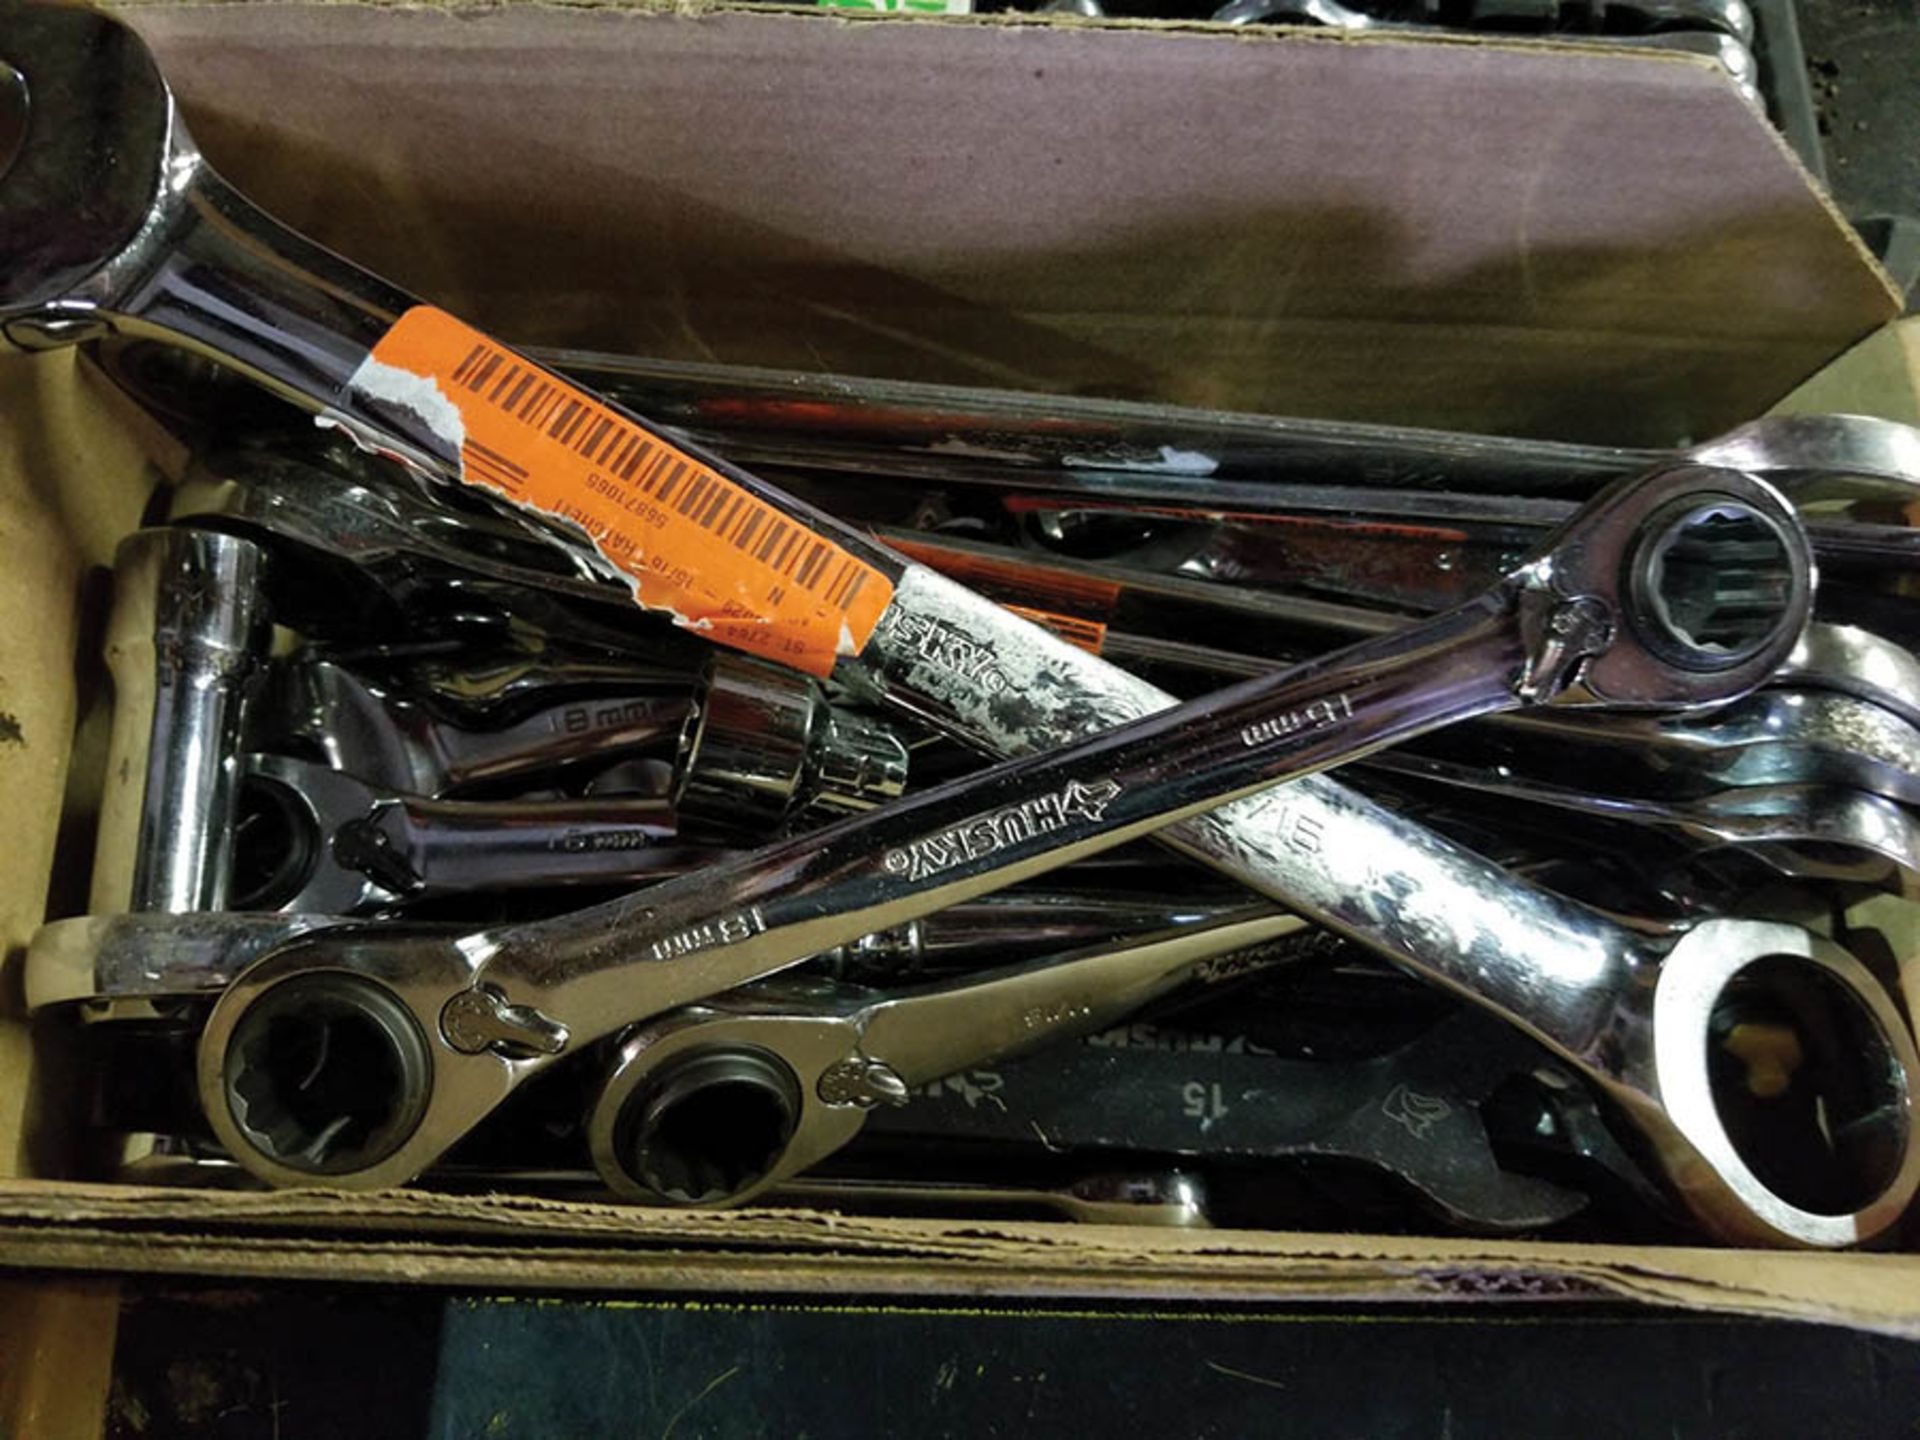 PITTSBURGH 32 PC. COMBINATION WRENCH SET, BOX OF ASSORTED SOCKETS, RATCHET WRENCHES, RATCHET DRIVES, - Image 2 of 5